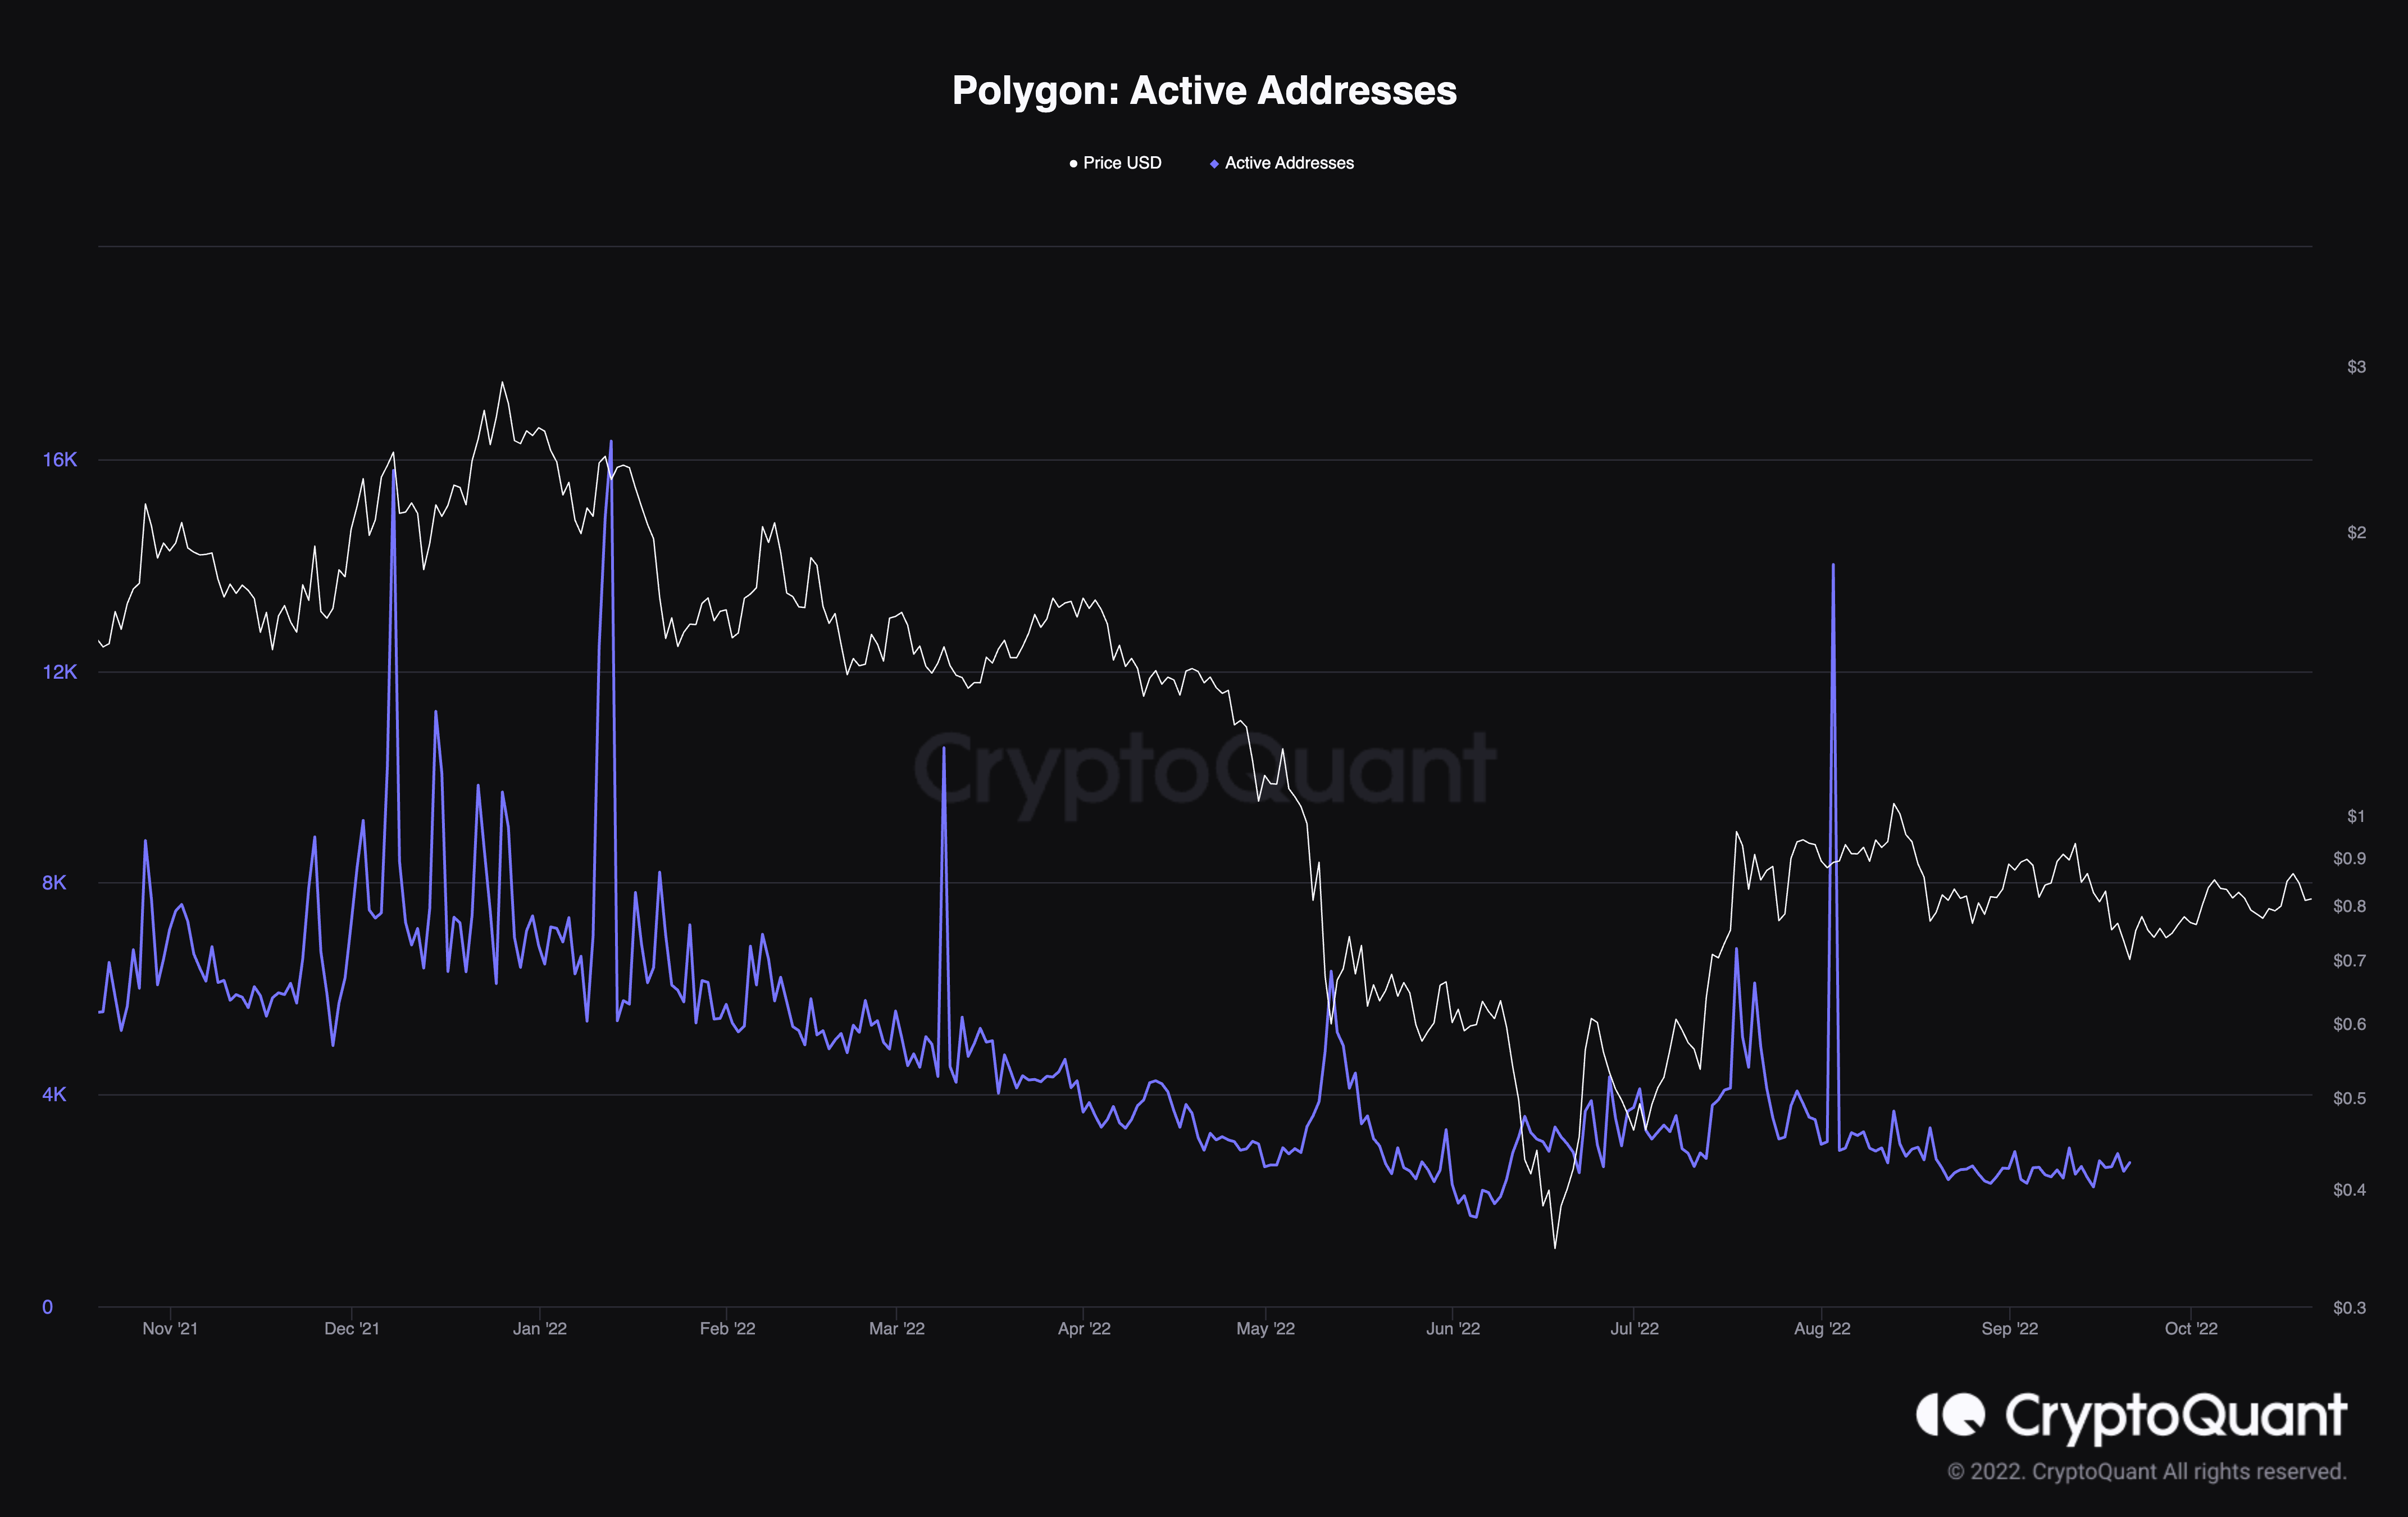 Polygon active address count. Source: CryptoQuant